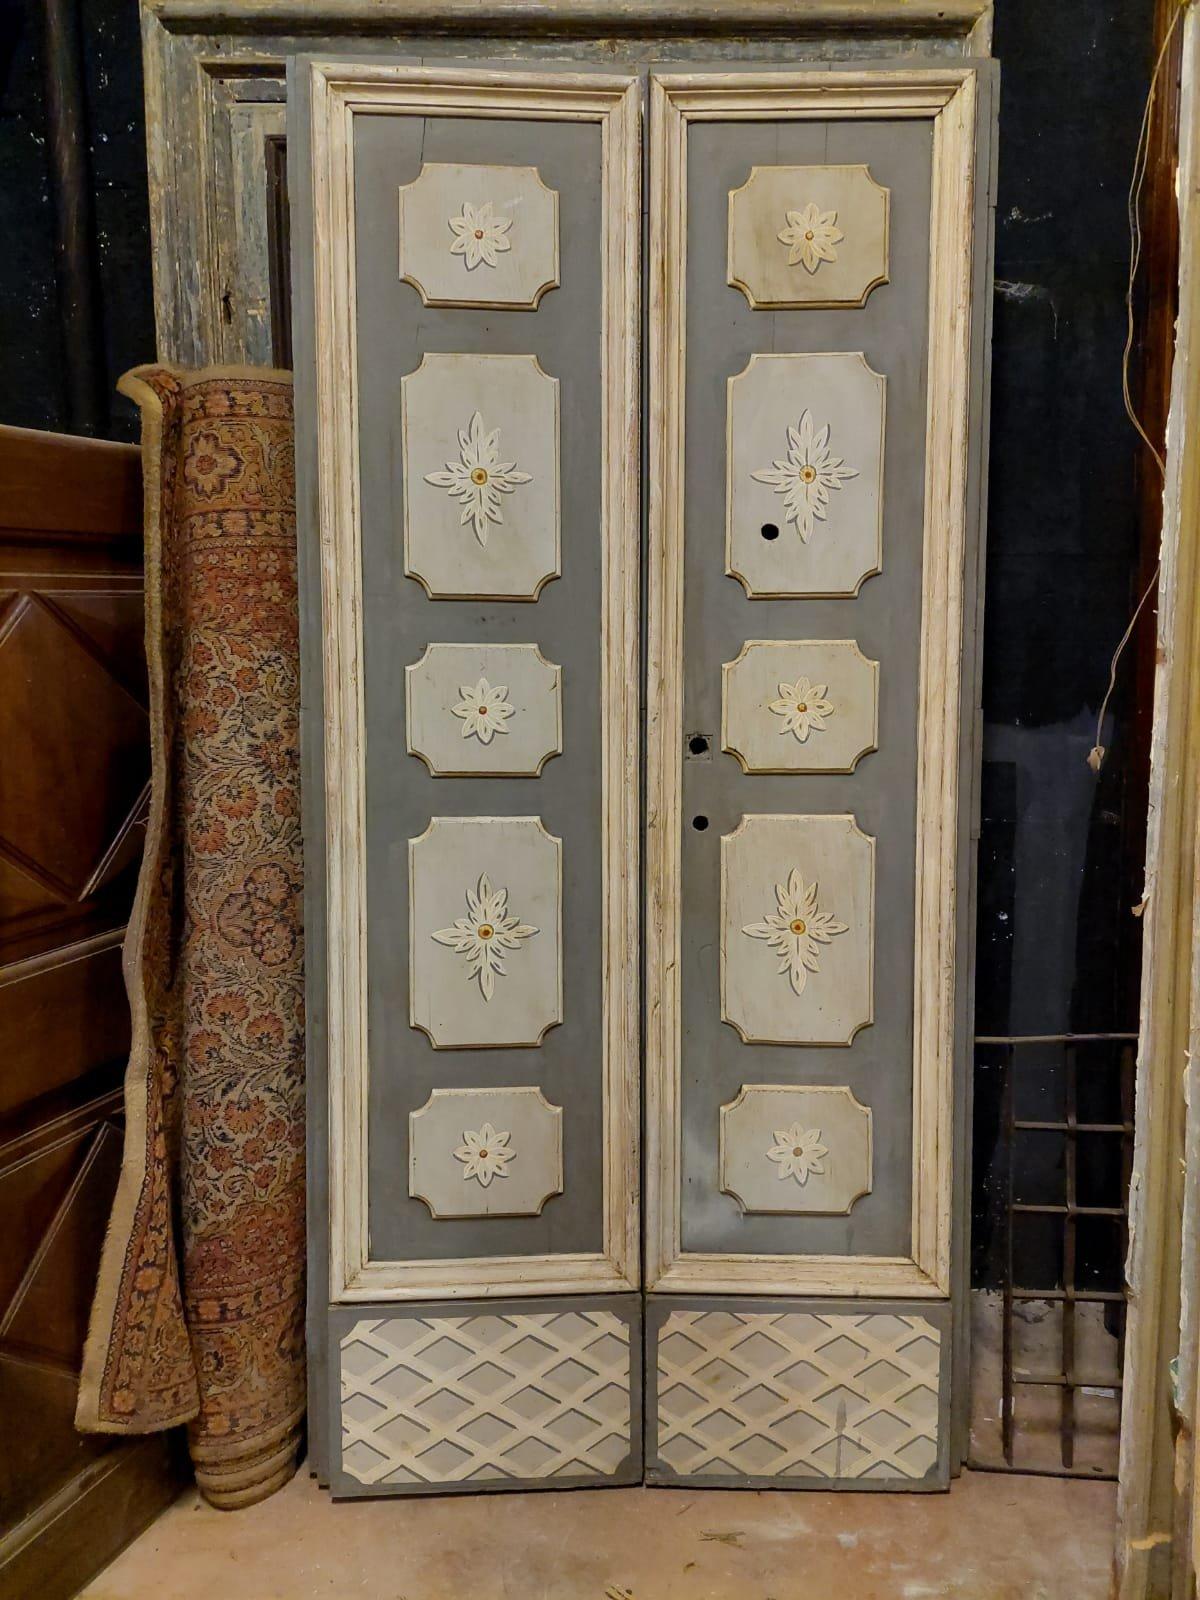 Antique double door, lacquered and painted, with carved panels and back also decorated and painted, already with hinges to push and beat all around the door of 2 cm, gray colors with painted star / flower, without lock, to be adapted to use but in